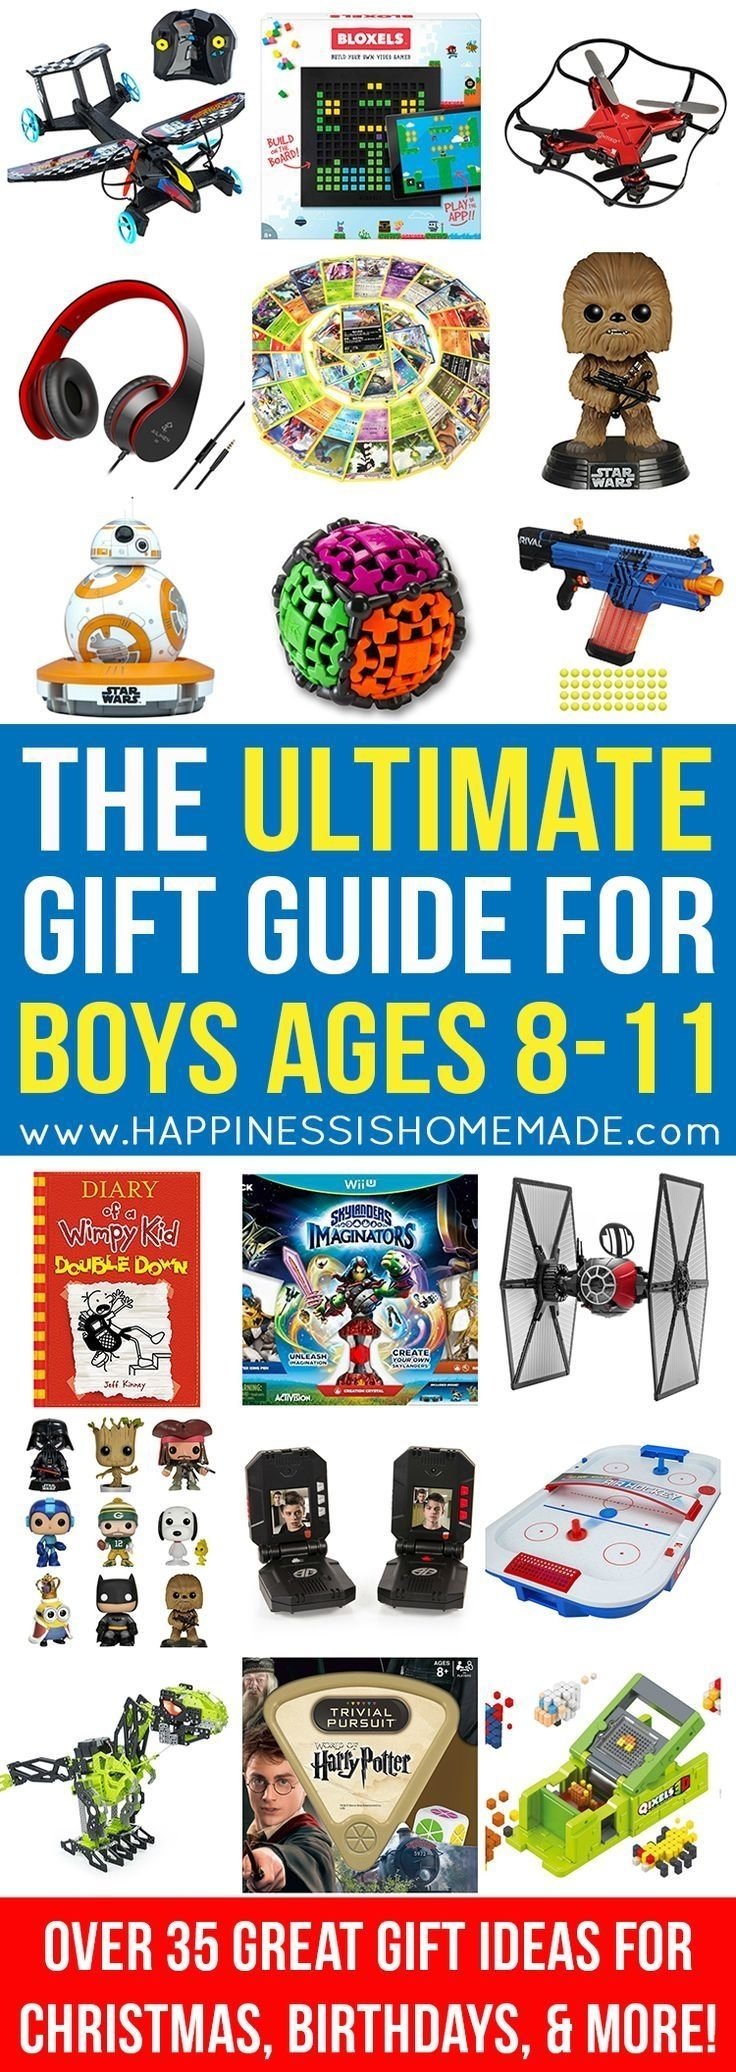 10 Great Christmas Gift Ideas For 8 Year Old Boy 144 best best toys for 8 year old girls images on pinterest 1 2022